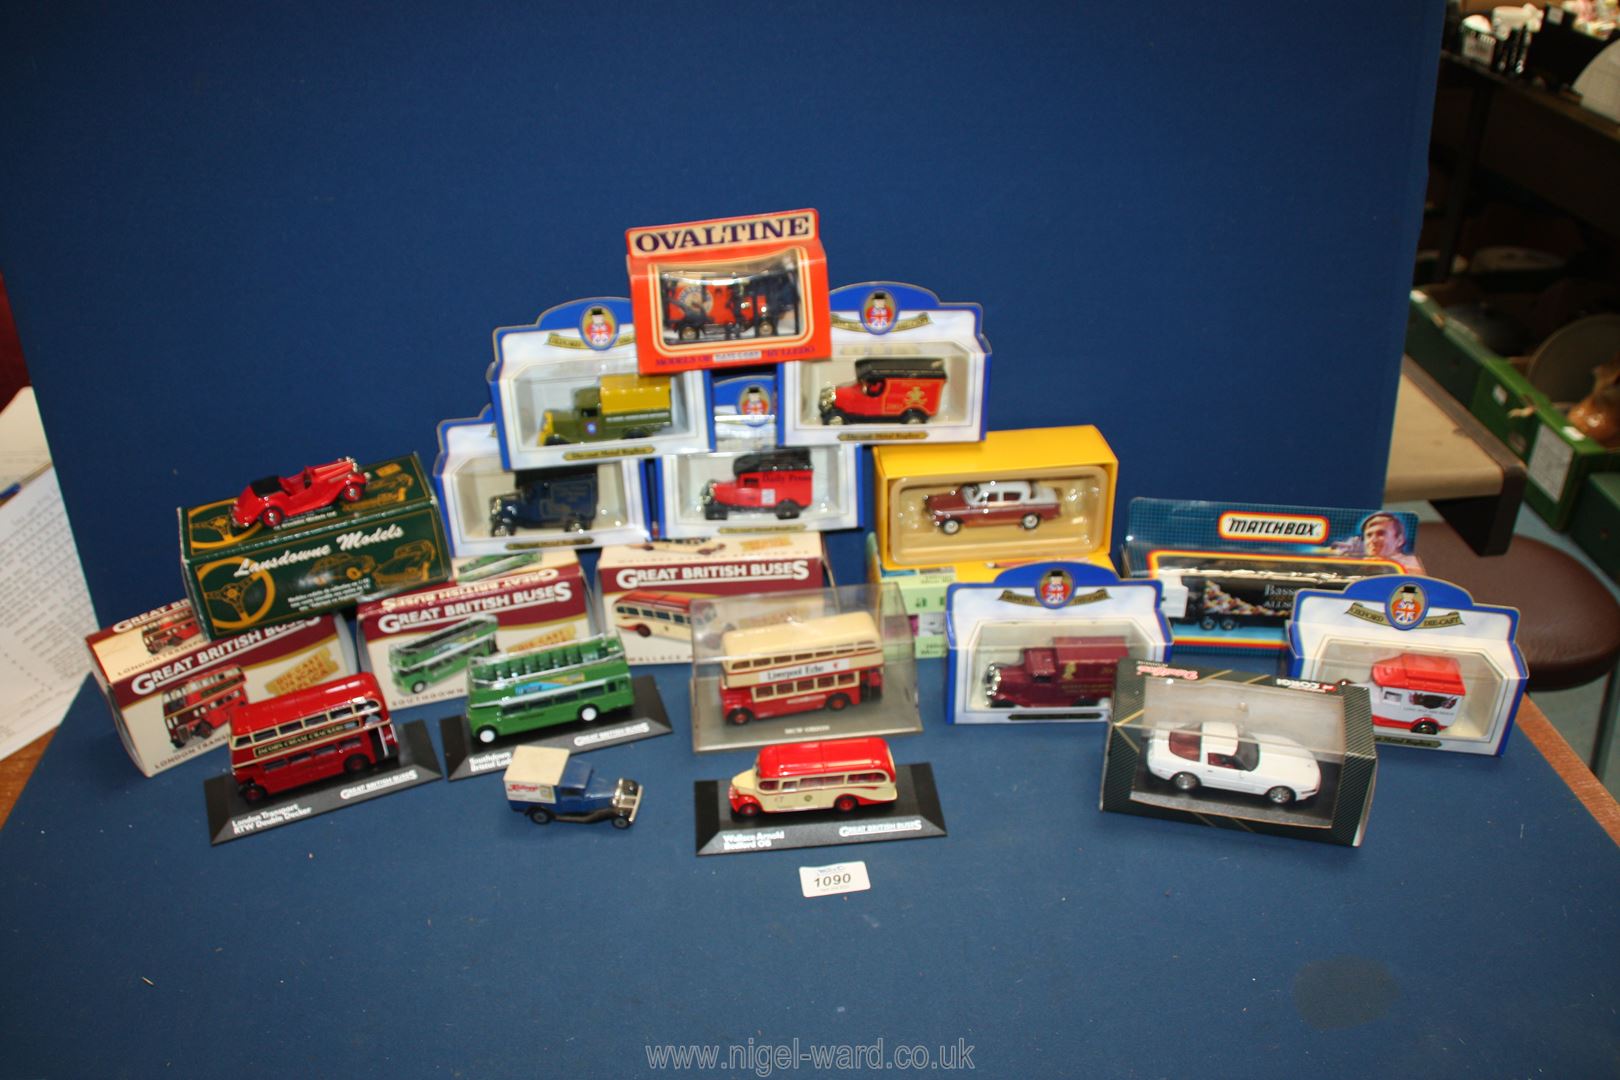 A quantity of model vintage cars and buses including Oxford Die-cast replicas and Great British